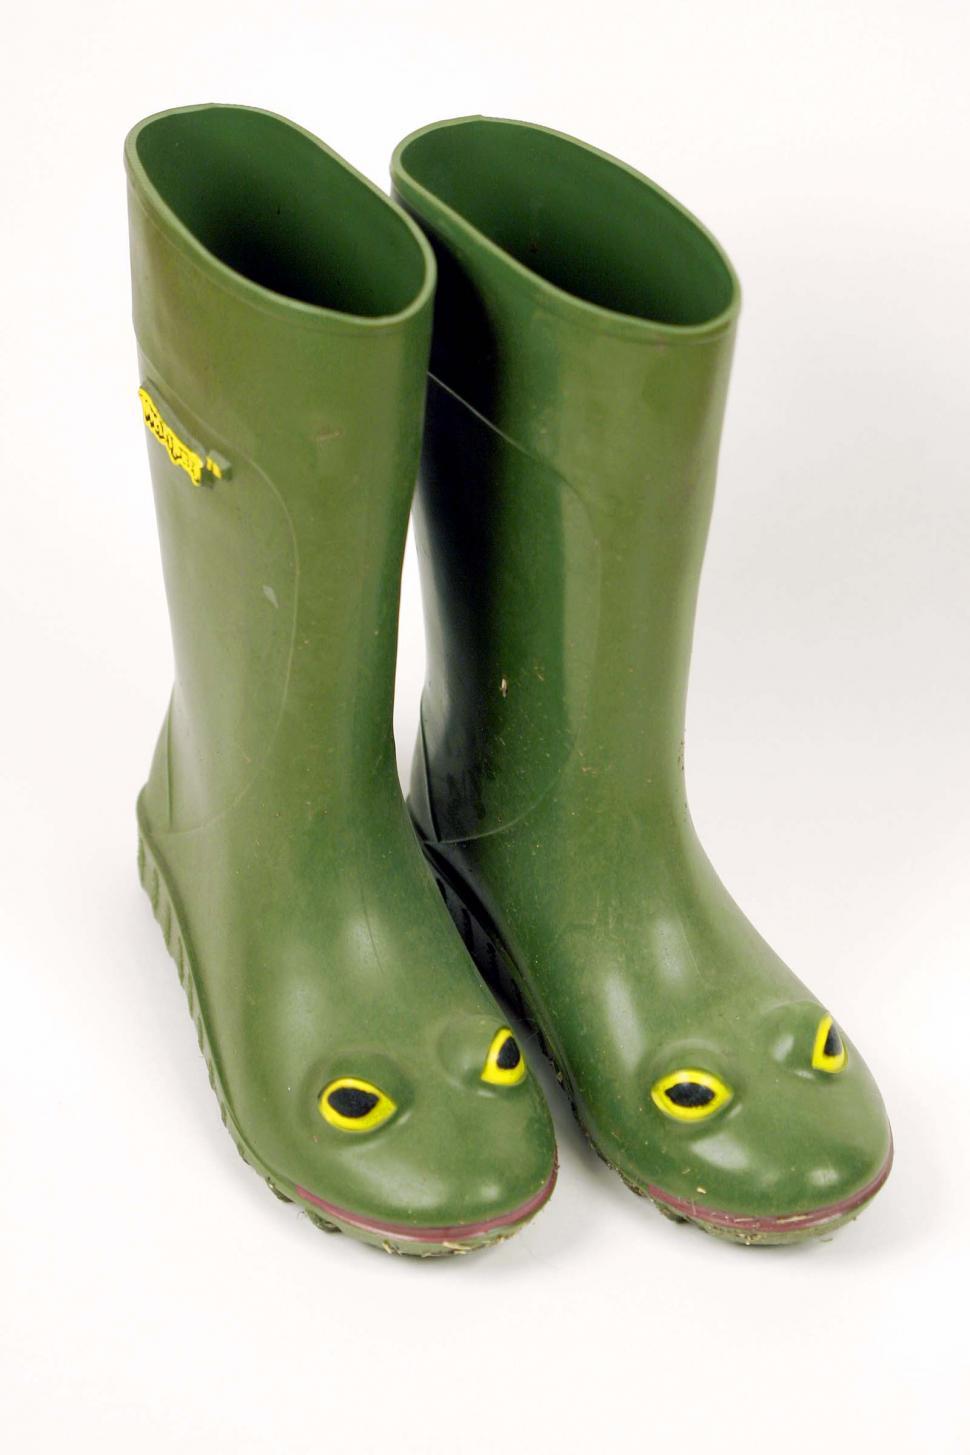 Free Image of Green Rain Boots With Yellow Eyes 